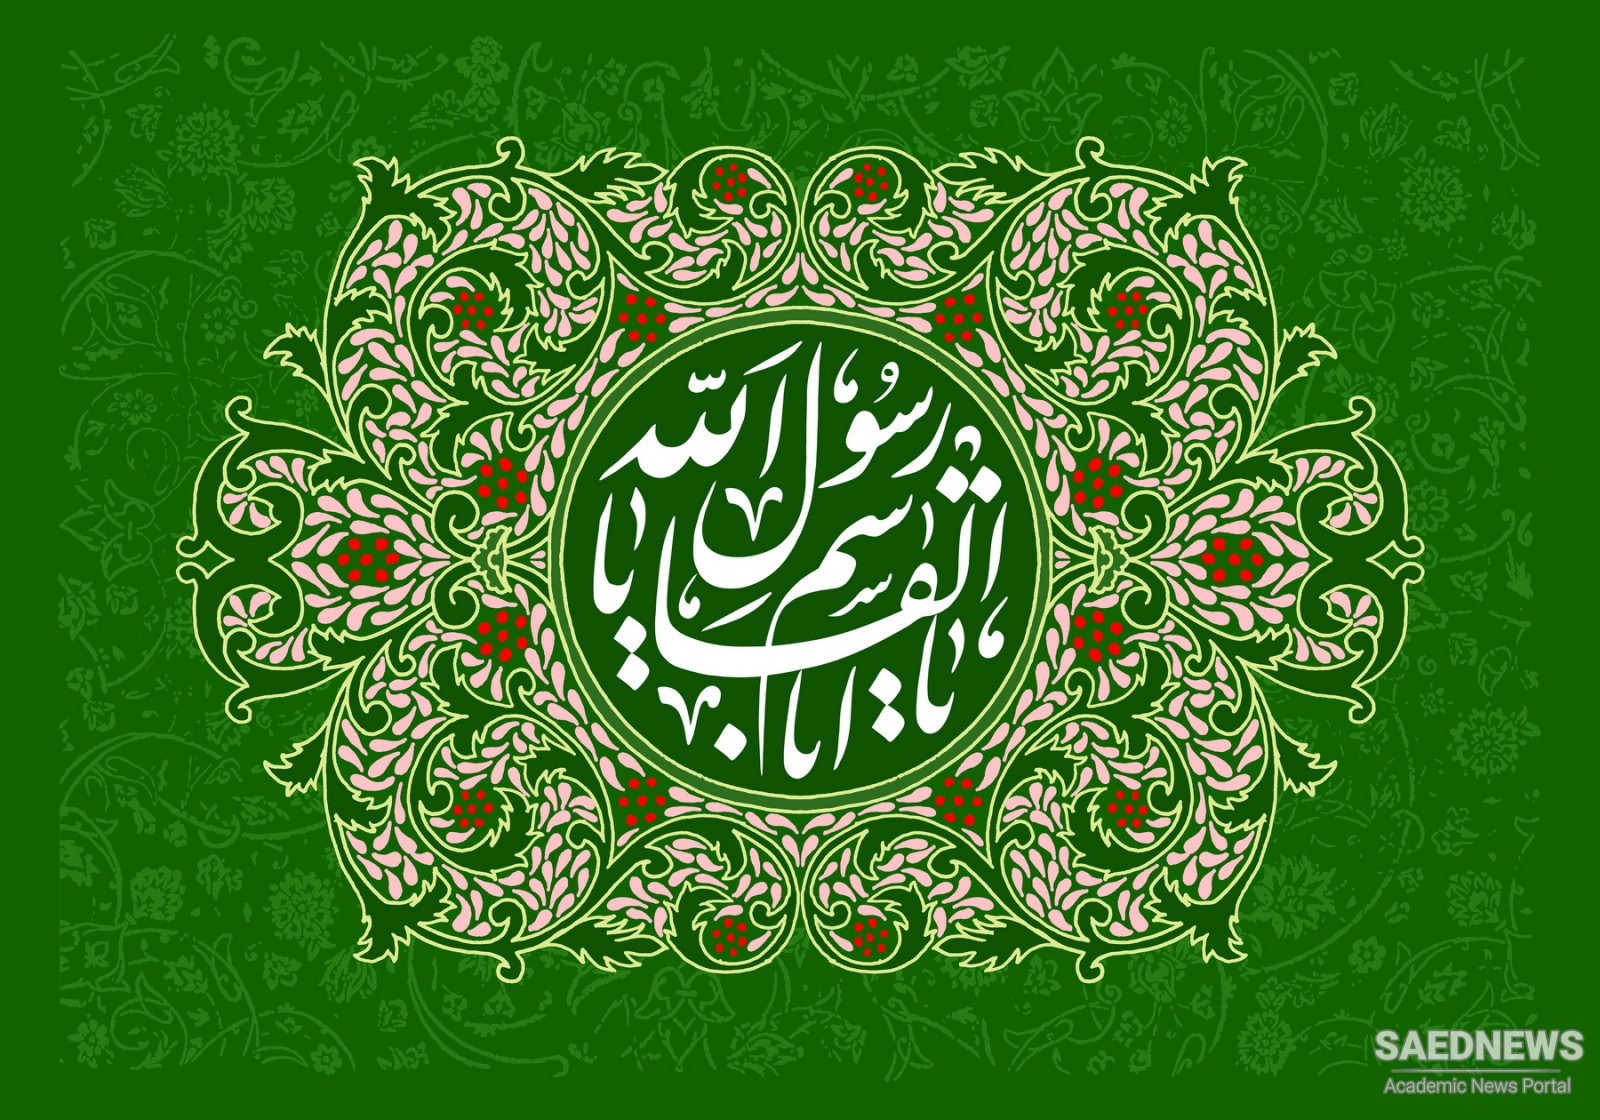 Muhammad: the mission of the Arab Prophet